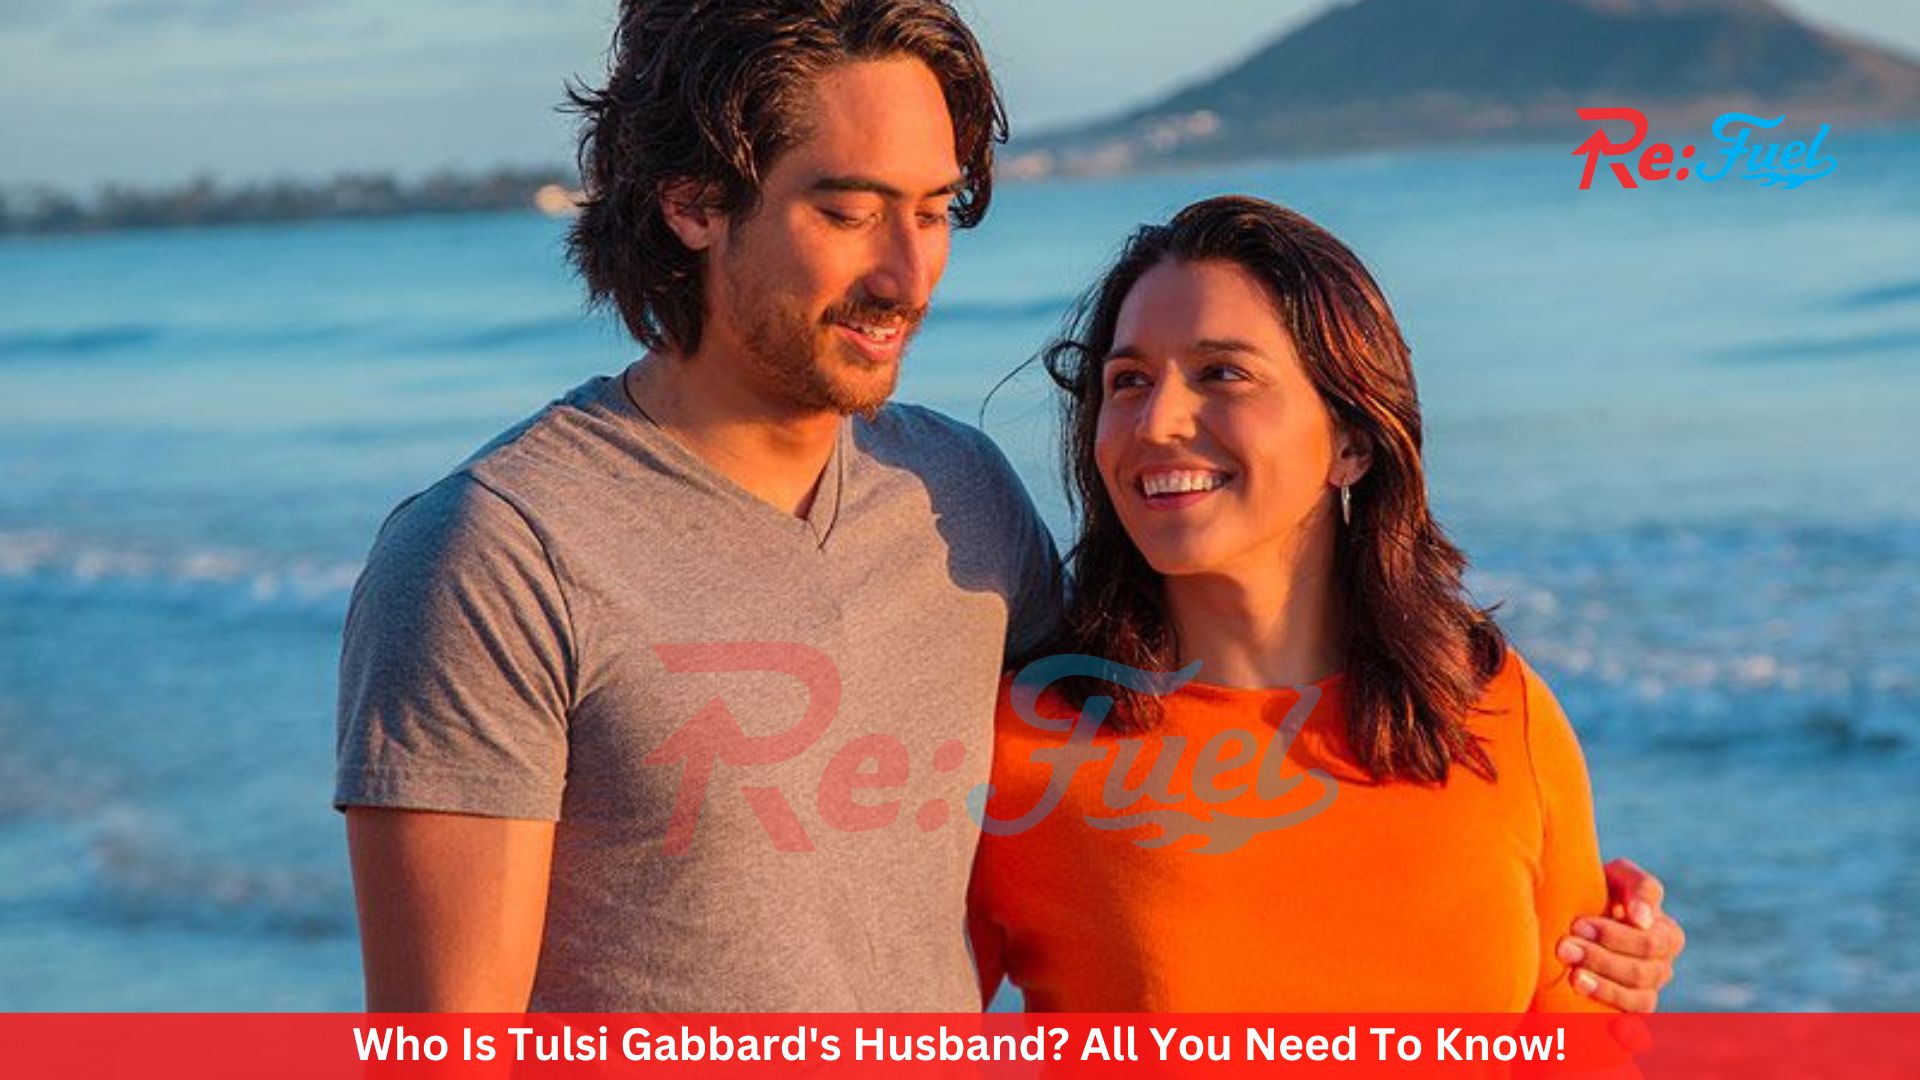 Who Is Tulsi Gabbard's Husband? All You Need To Know!